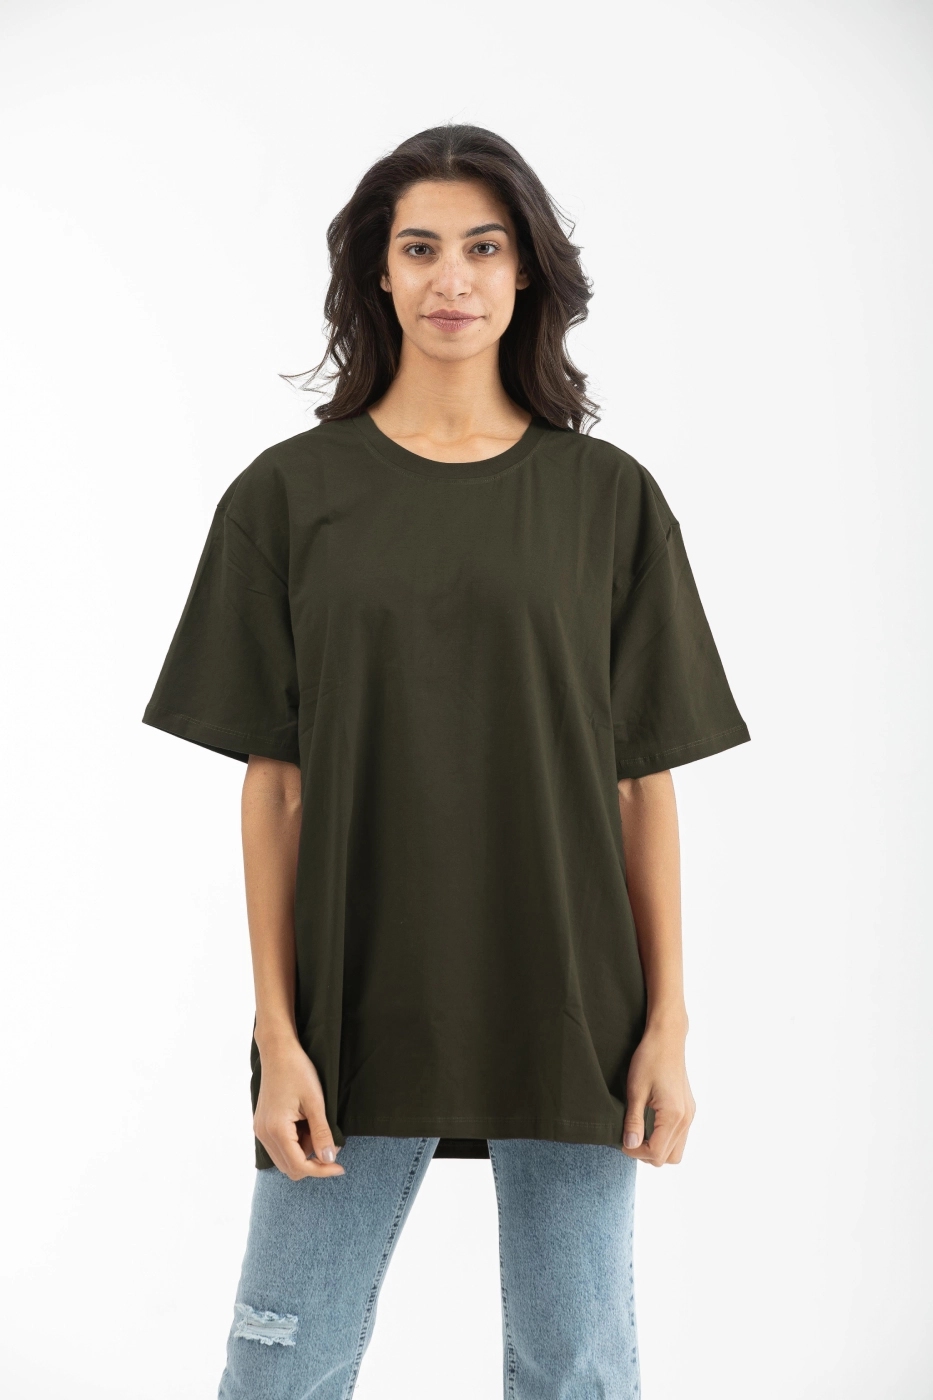 Short Sleeved T-Shirt In Olive Green thumbnail